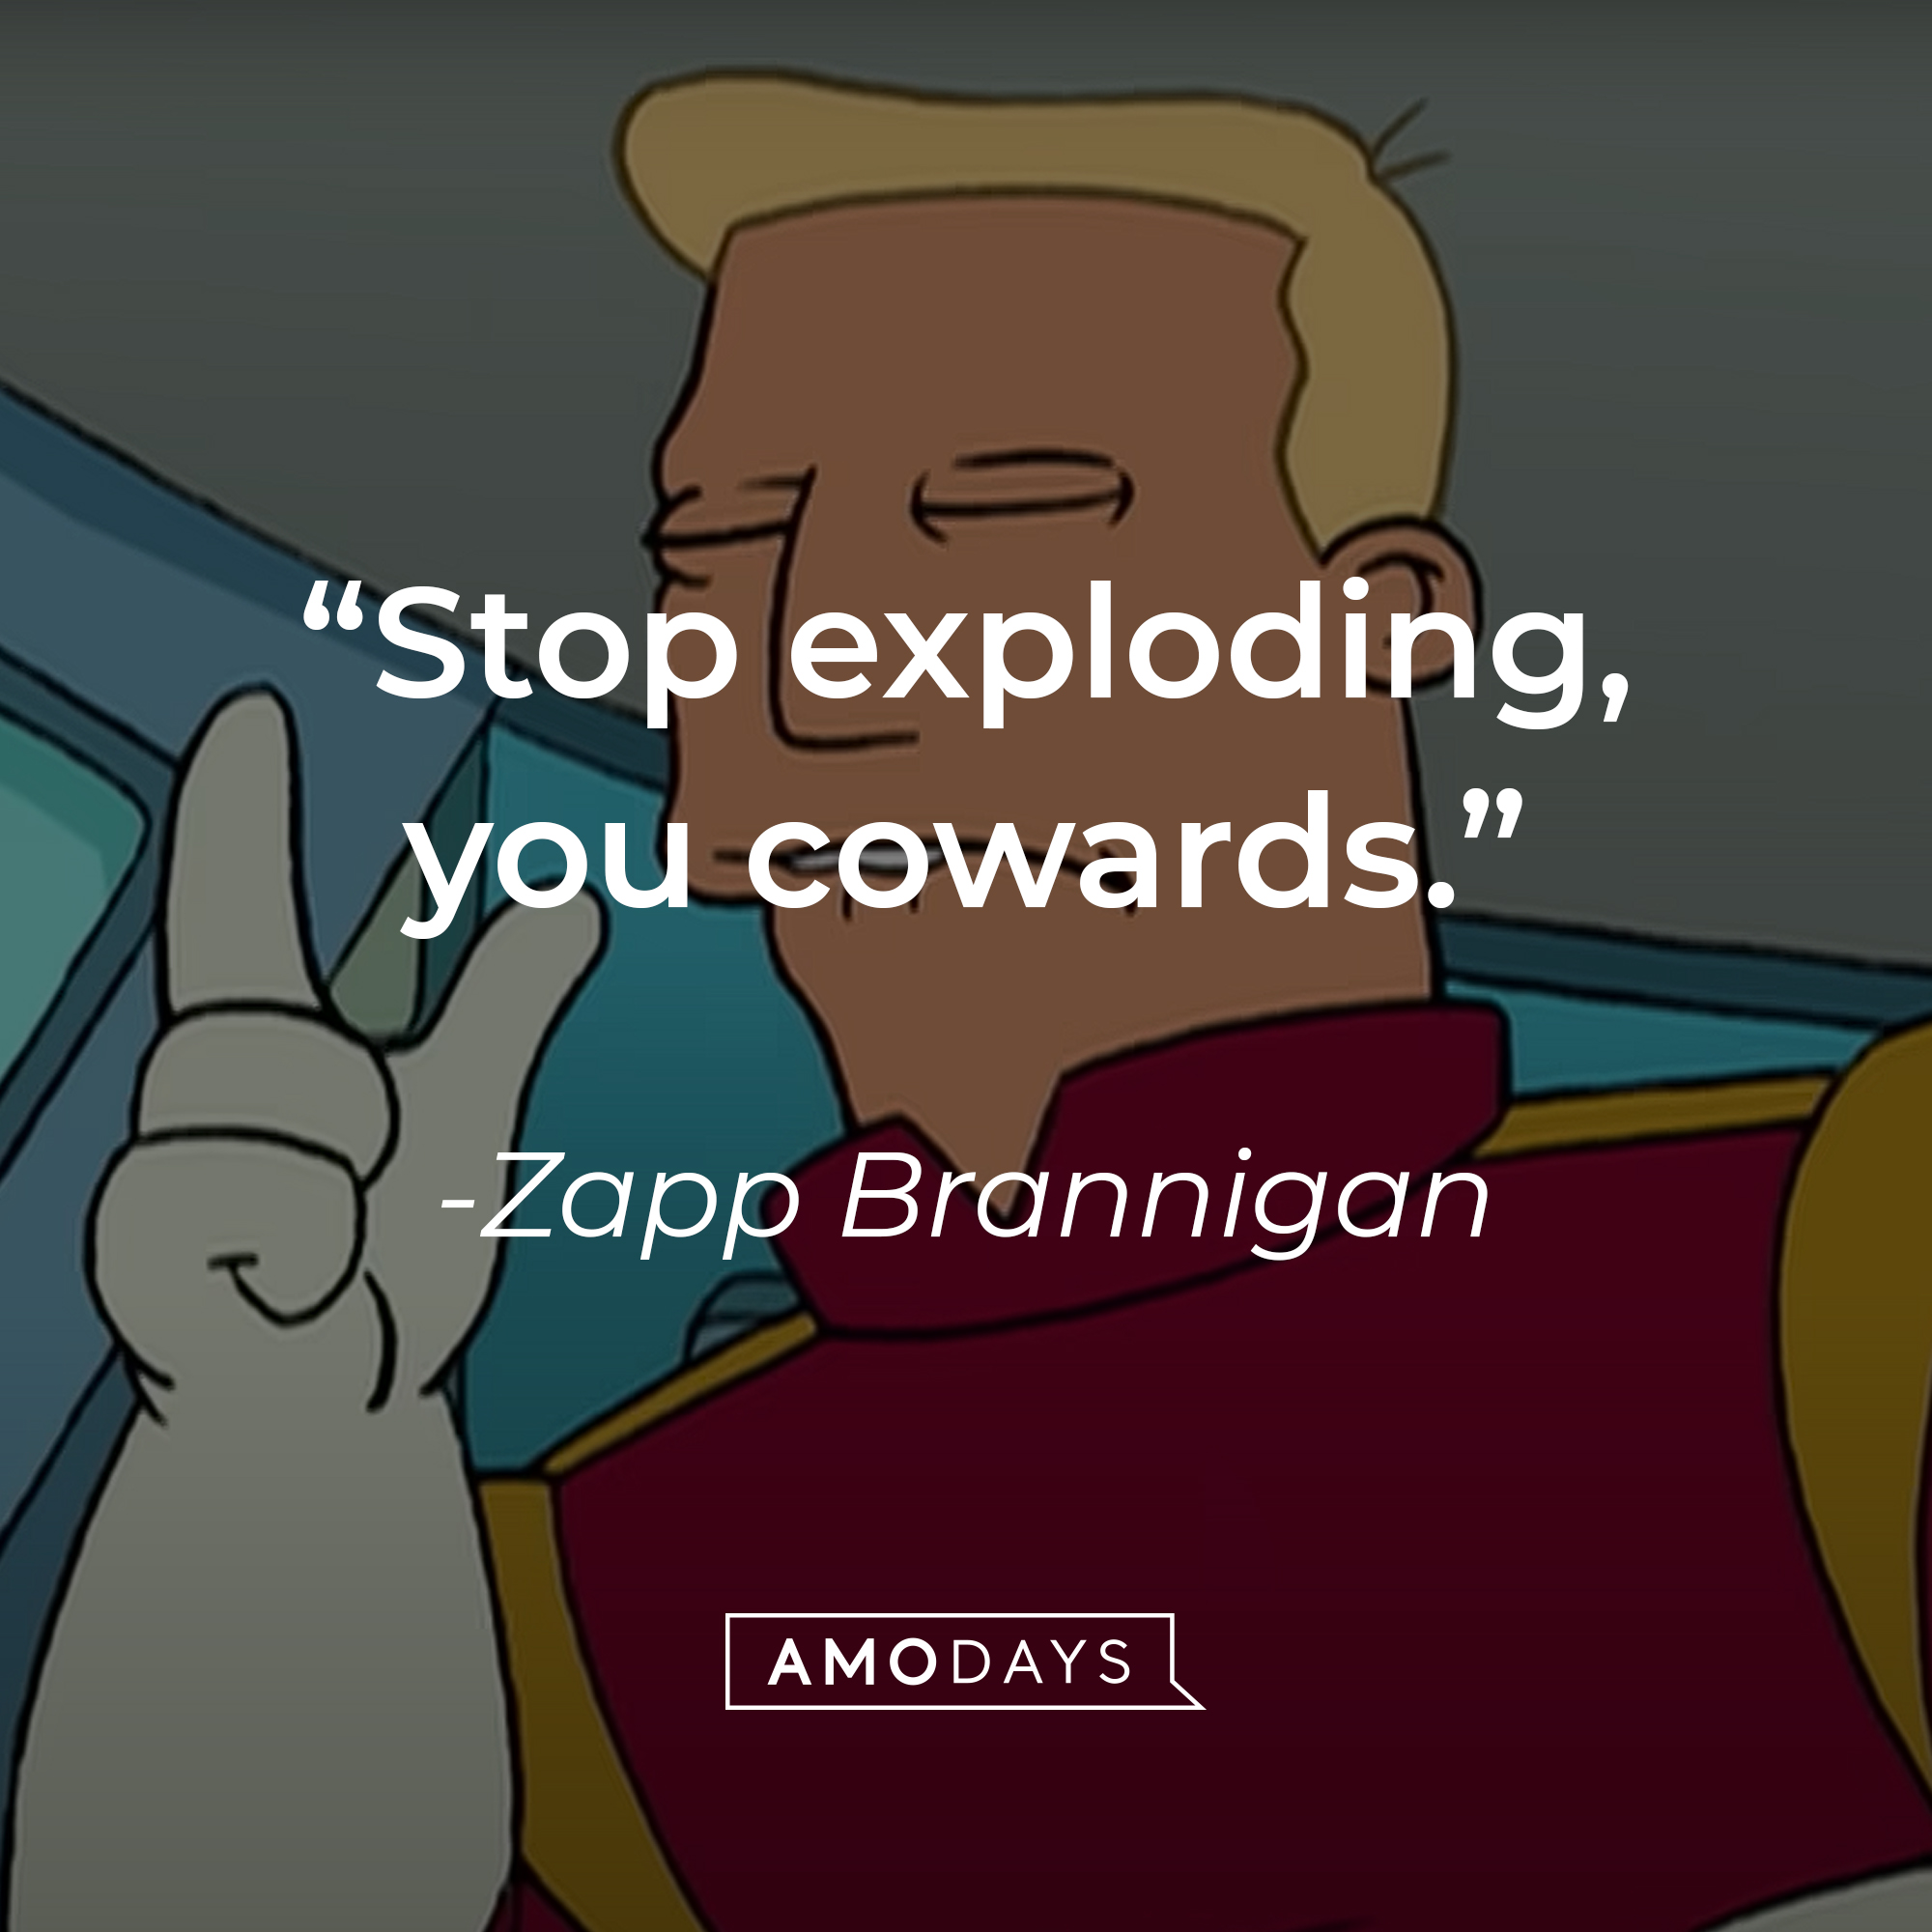 Zapp Brannigan's quote: "Stop exploding, you cowards." | Source: YouTube/adultswim